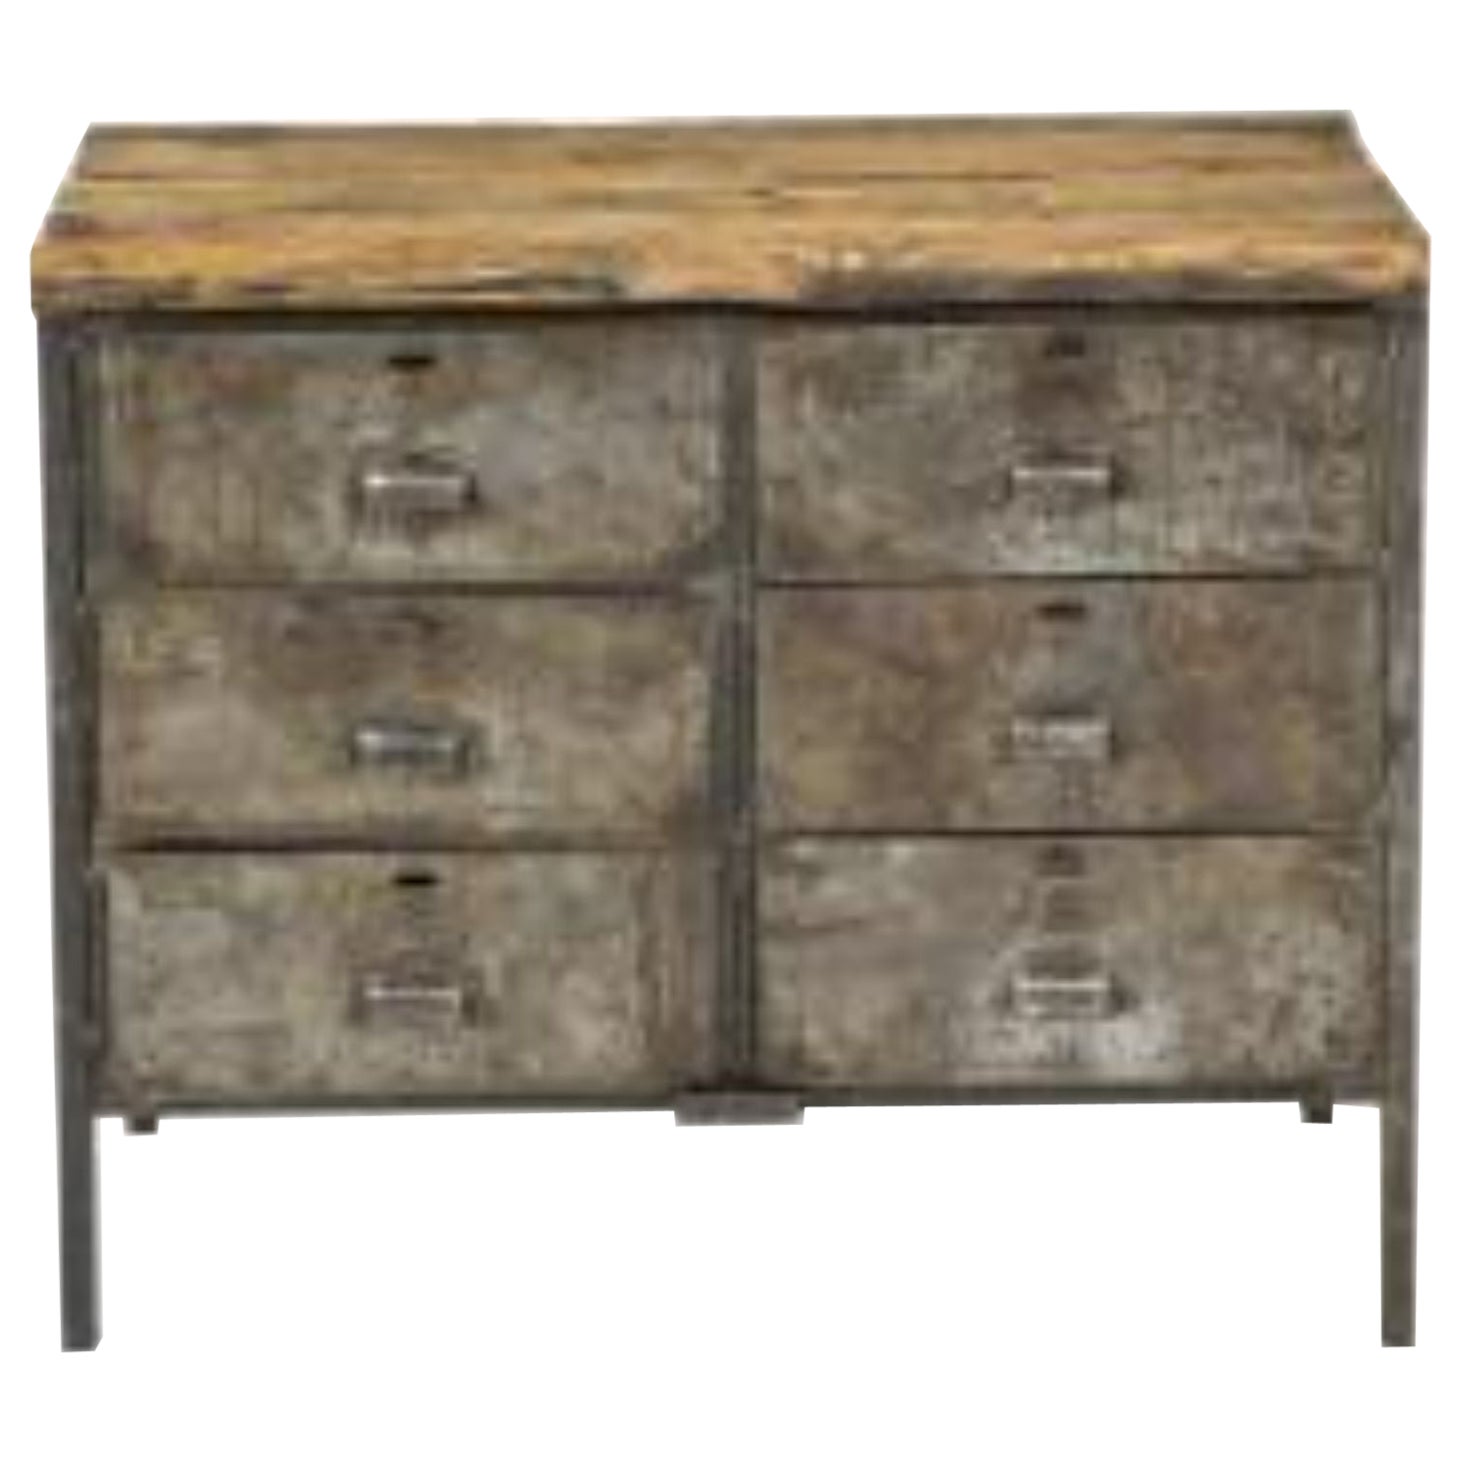 Antique Industrial Chest of Drawers in Metal and Chunky Wood Top, circa 1900